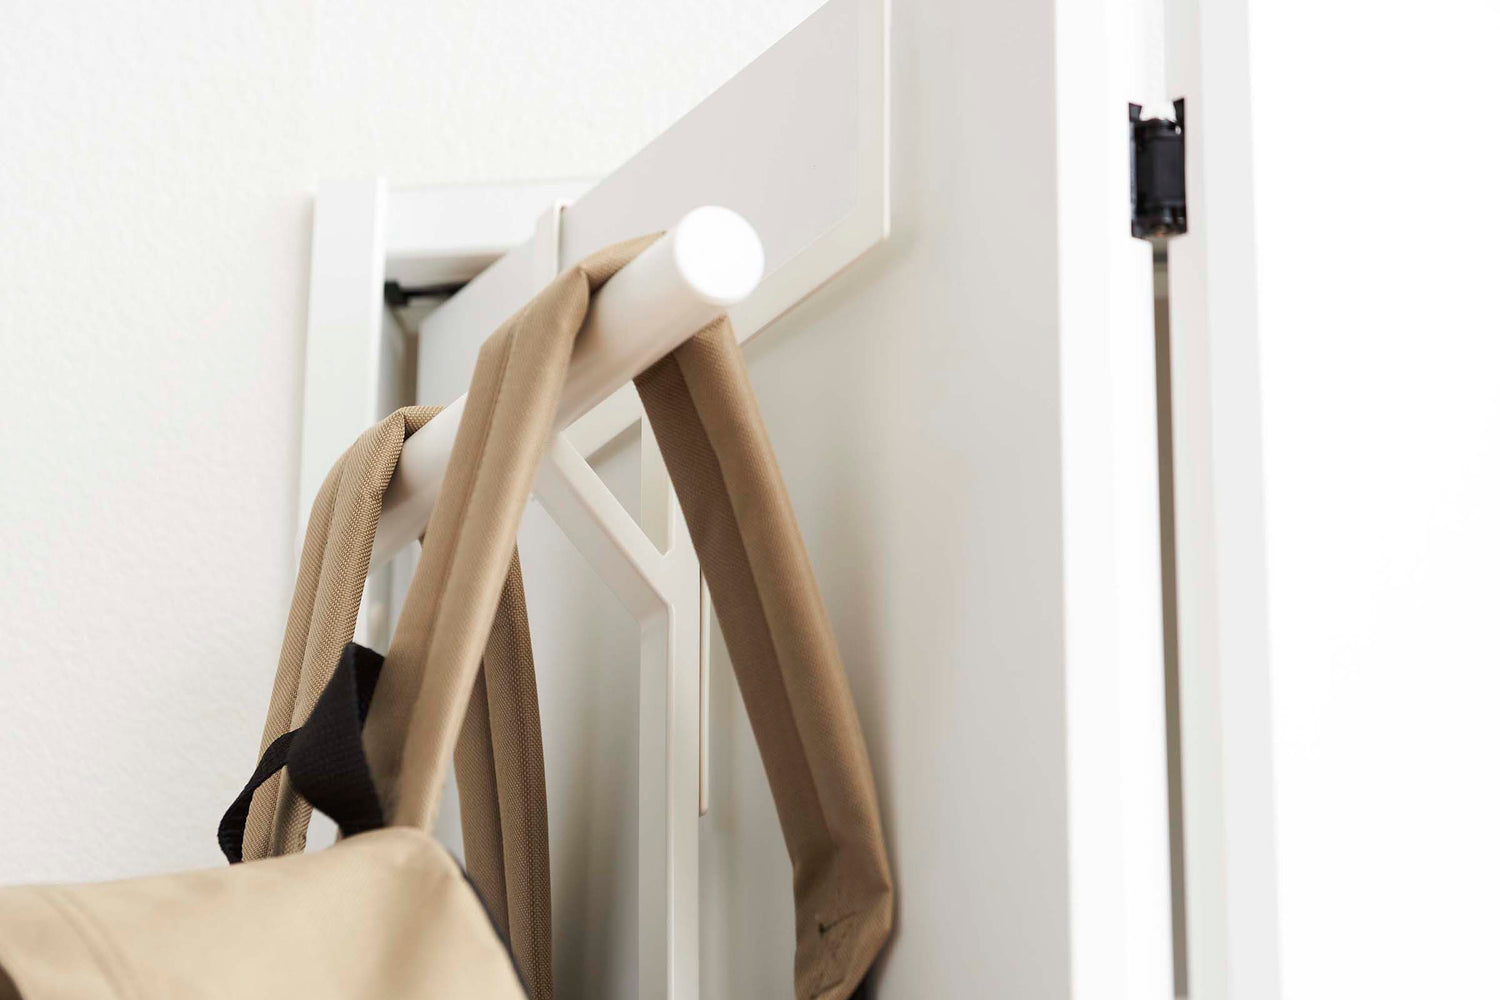 View 4 - Close up side view of White Kids' Backpack Hanger holding a backpack on door by Yamazaki Home.